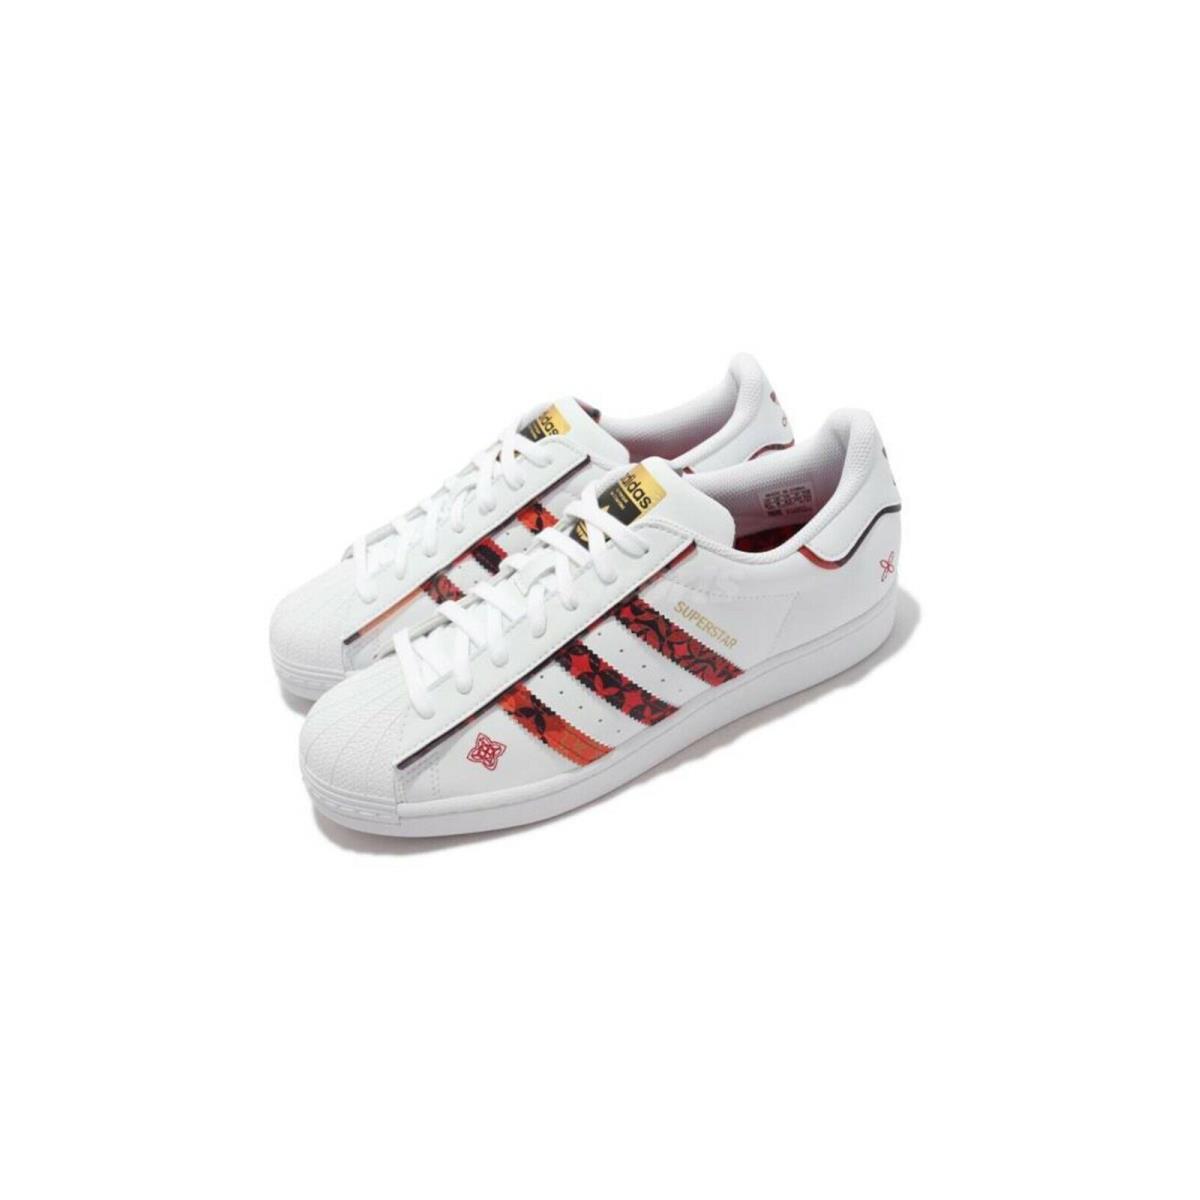 Adidas shoes Superstar - White 0